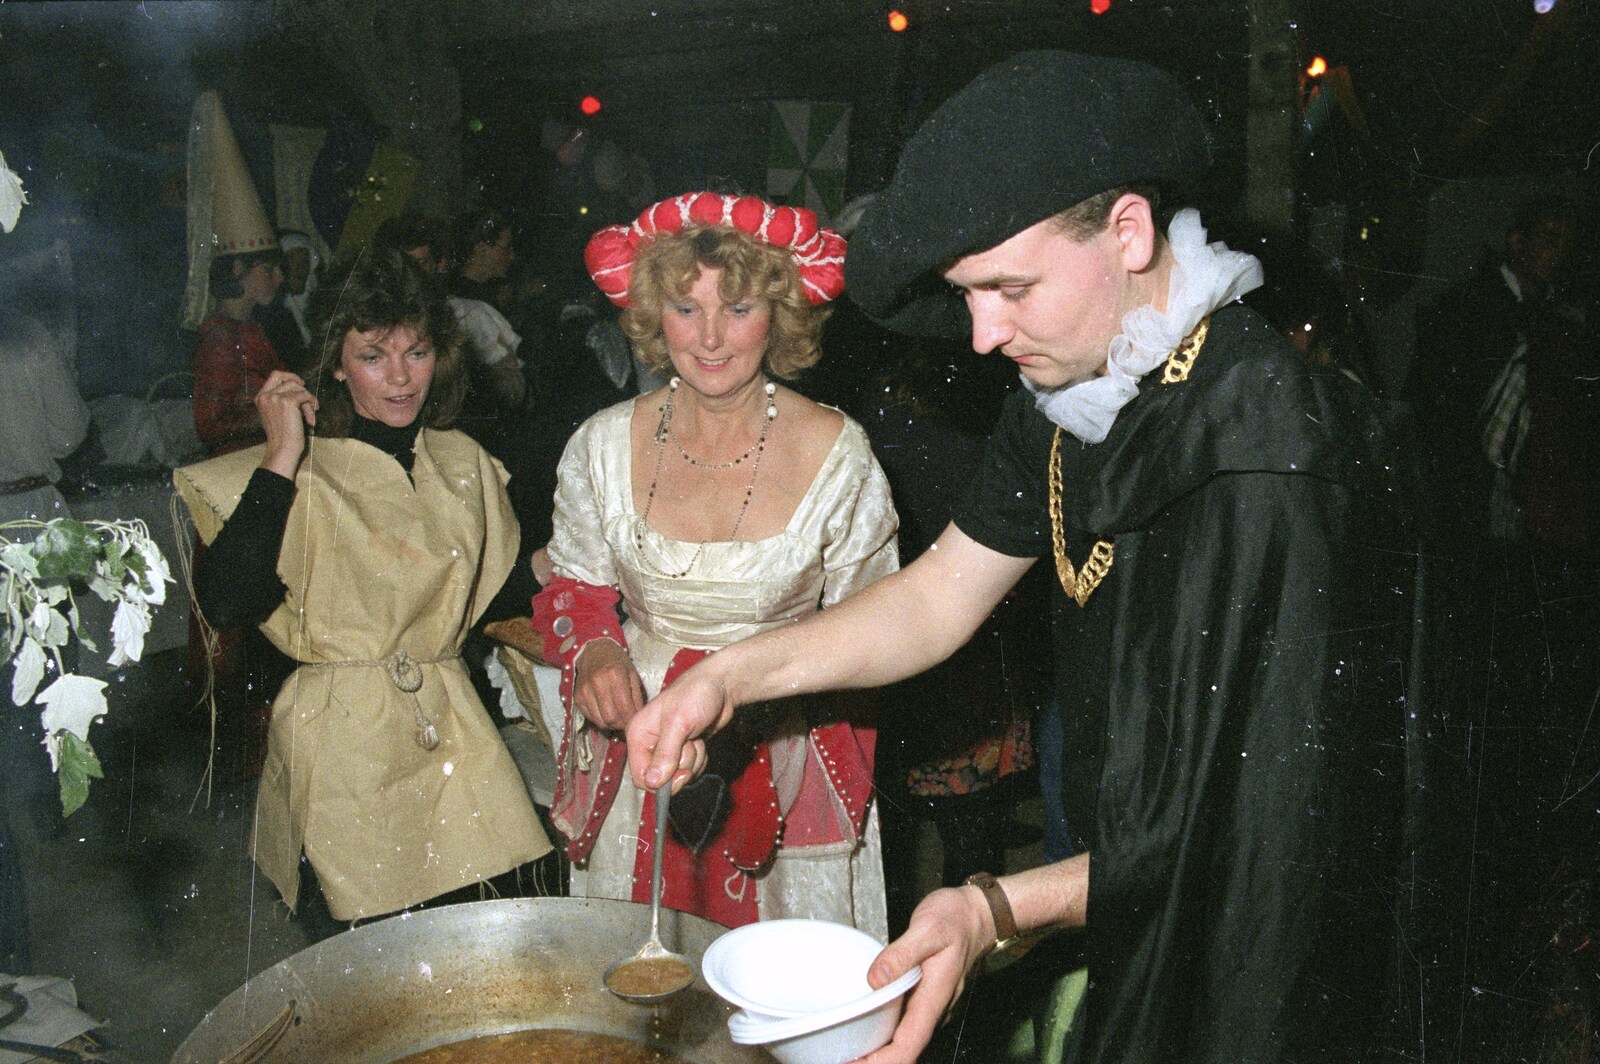 Some sort of soup is ladled out from A Mediaeval Birthday Party, Starston, Norfolk - 27th July 1990